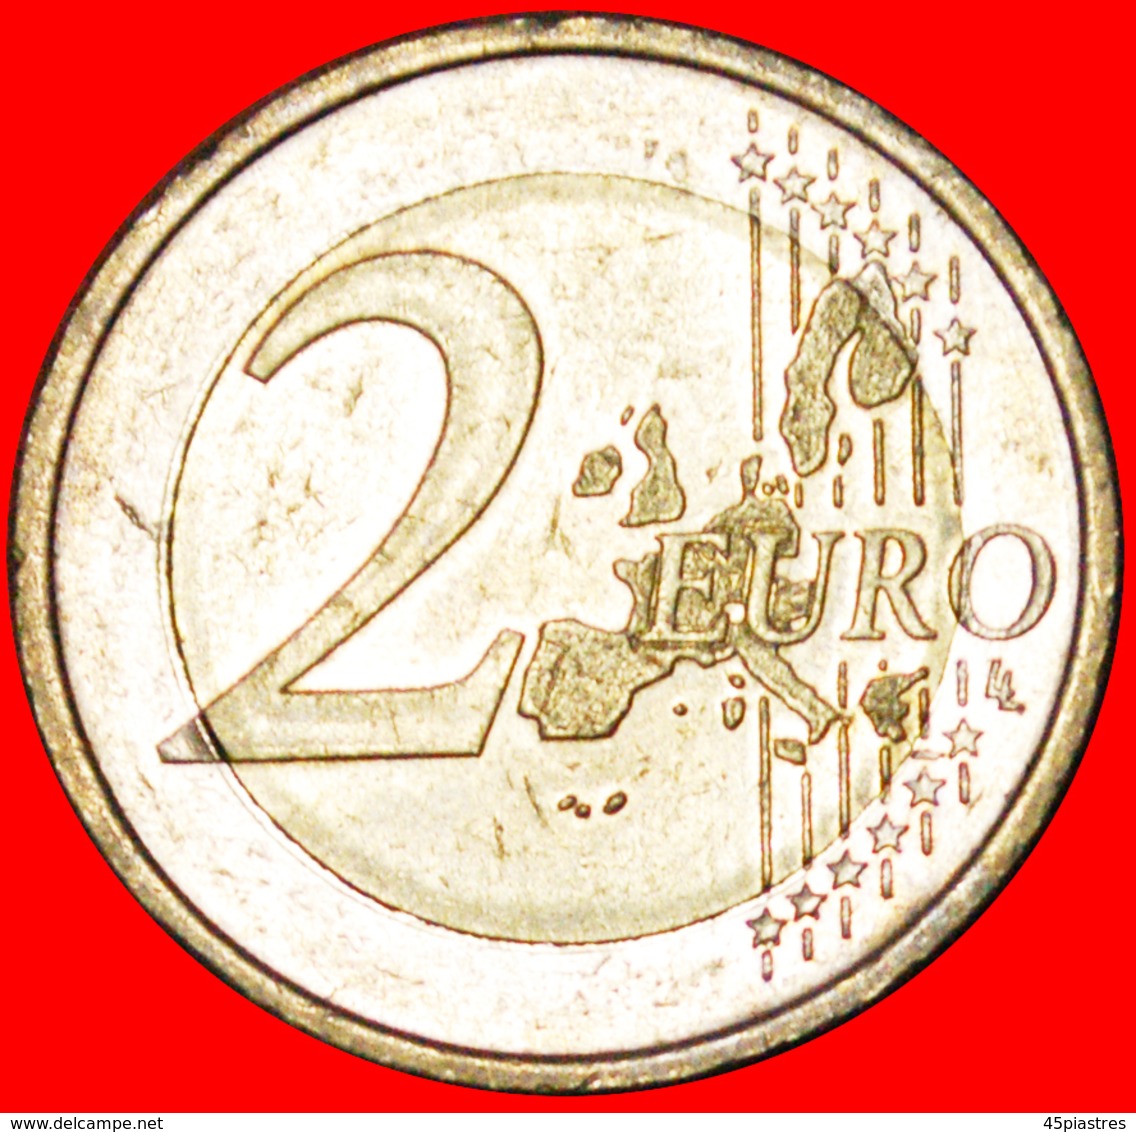 * LONG HEEL OF BOOT OF ITALY: IRELAND ★ 2 EURO 2005 UNCOMMON! UNPUBLISHED! LOW START ★  NO RESERVE! - Errors And Oddities